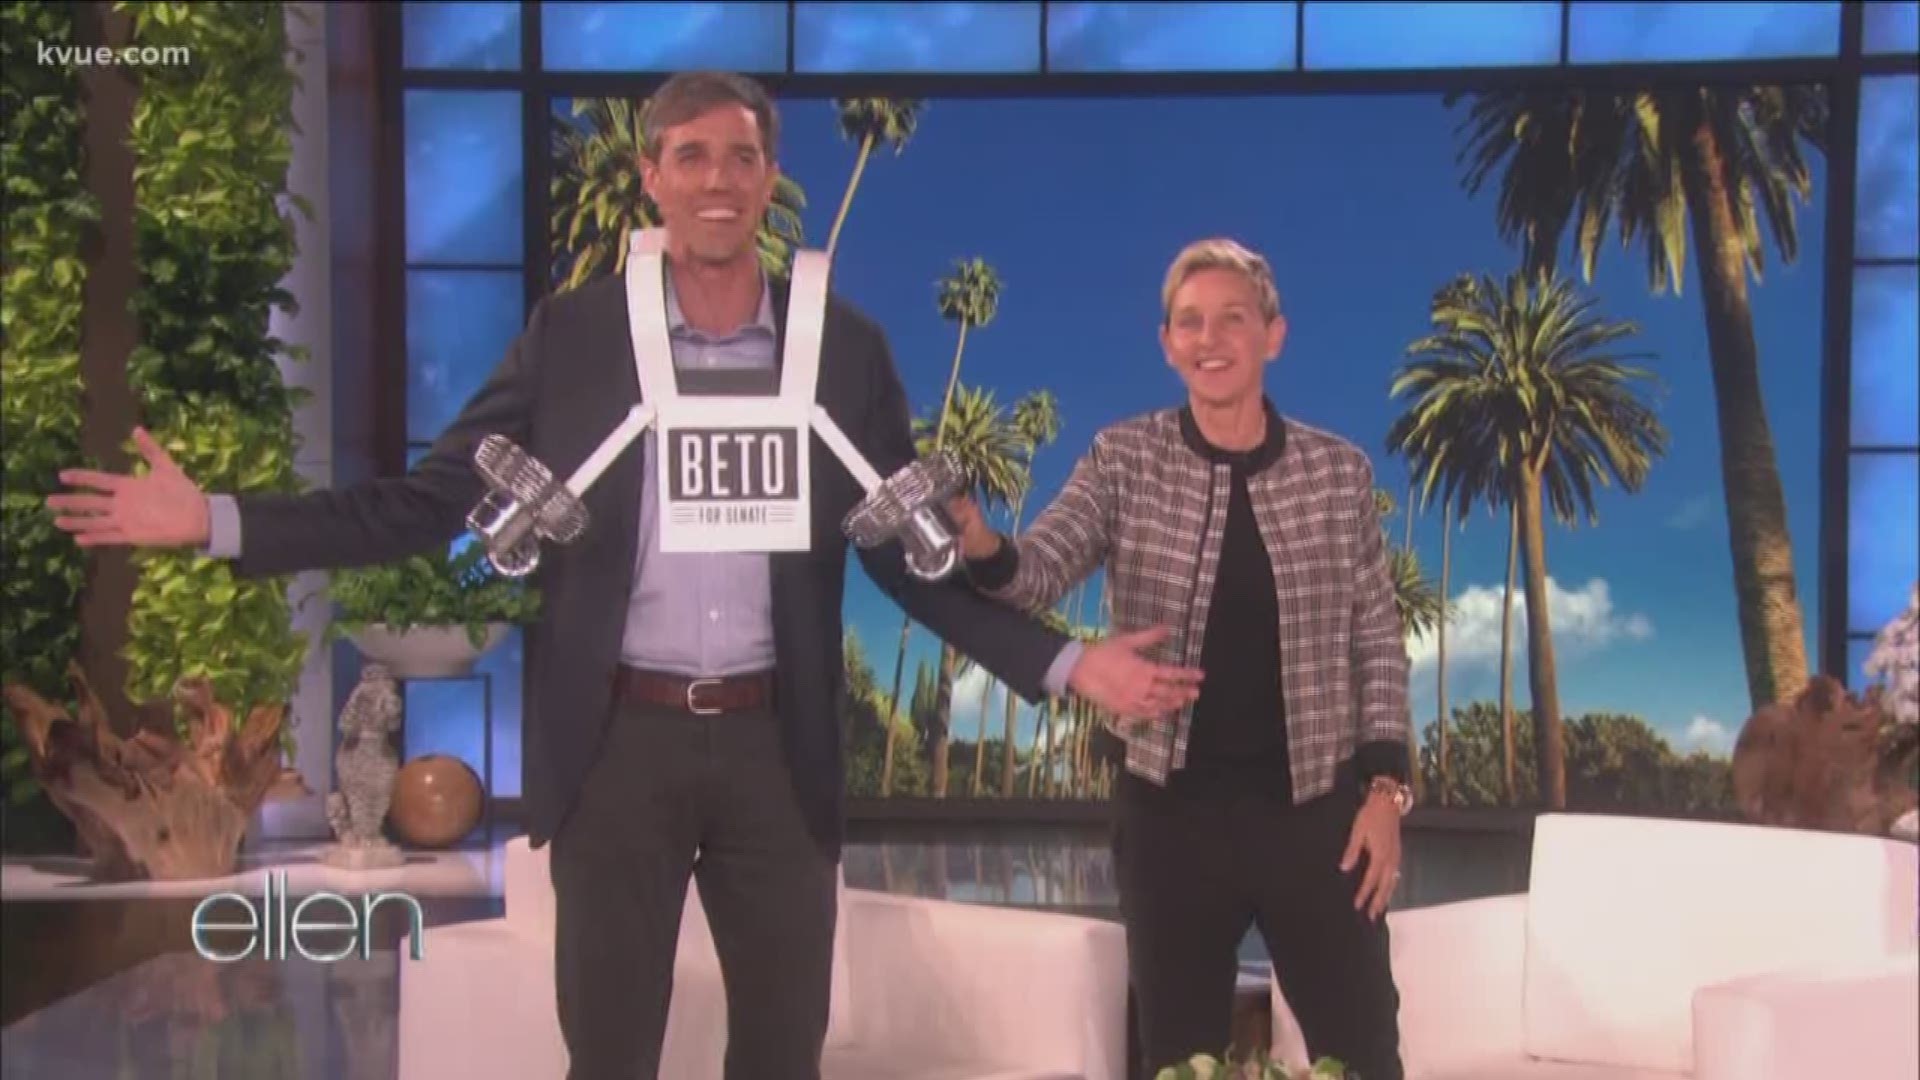 Ellen invited him to the show after a video circulated online about his response to a town hall question about kneeling for the anthem.